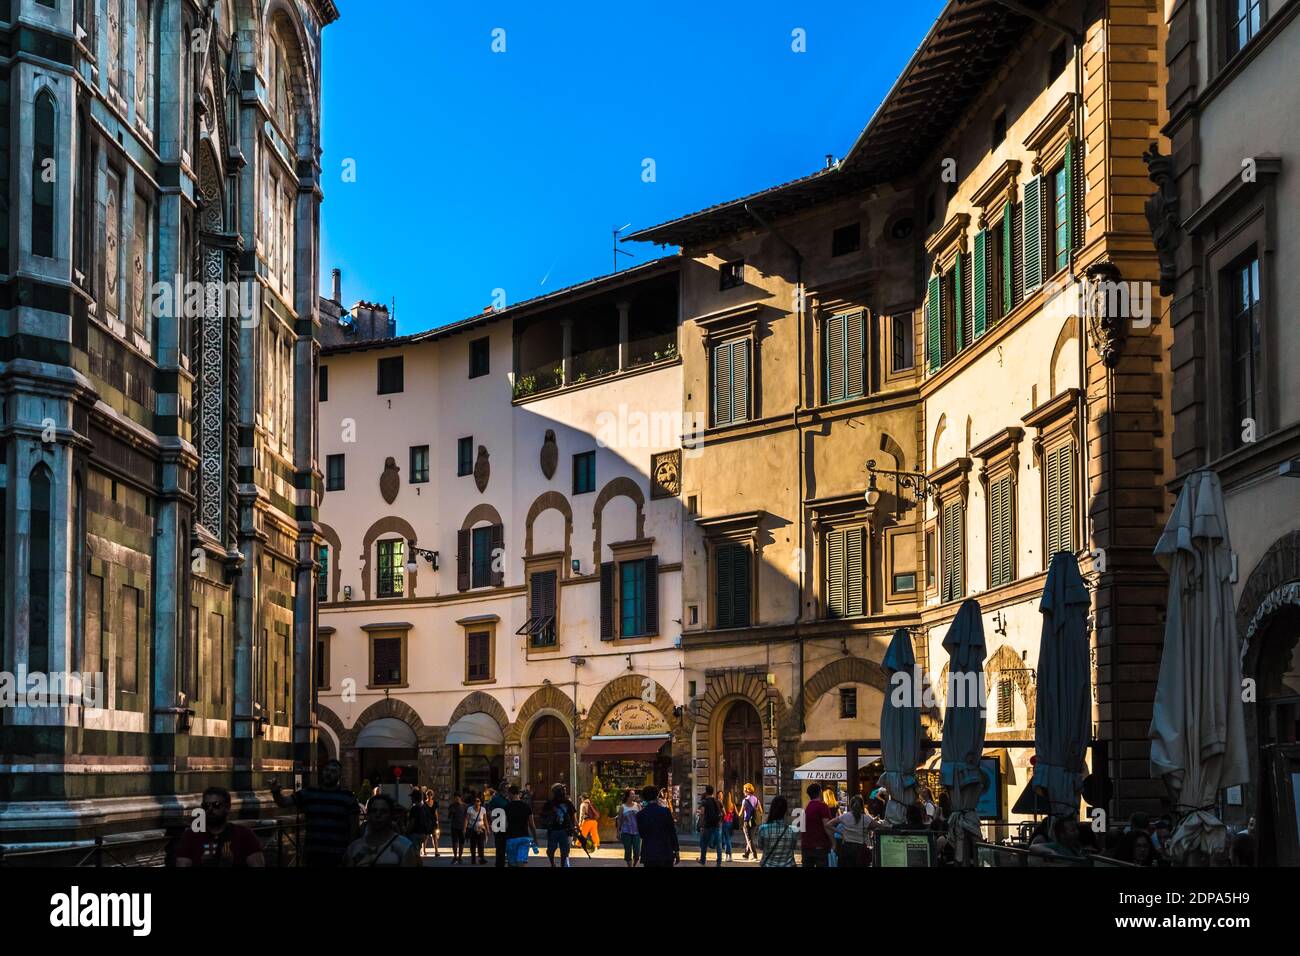 Great view of the Piazza del Duomo at the shaded northern flank of the famous Florence Cathedral Santa Maria del Fiore with shops and restaurants on... Stock Photo